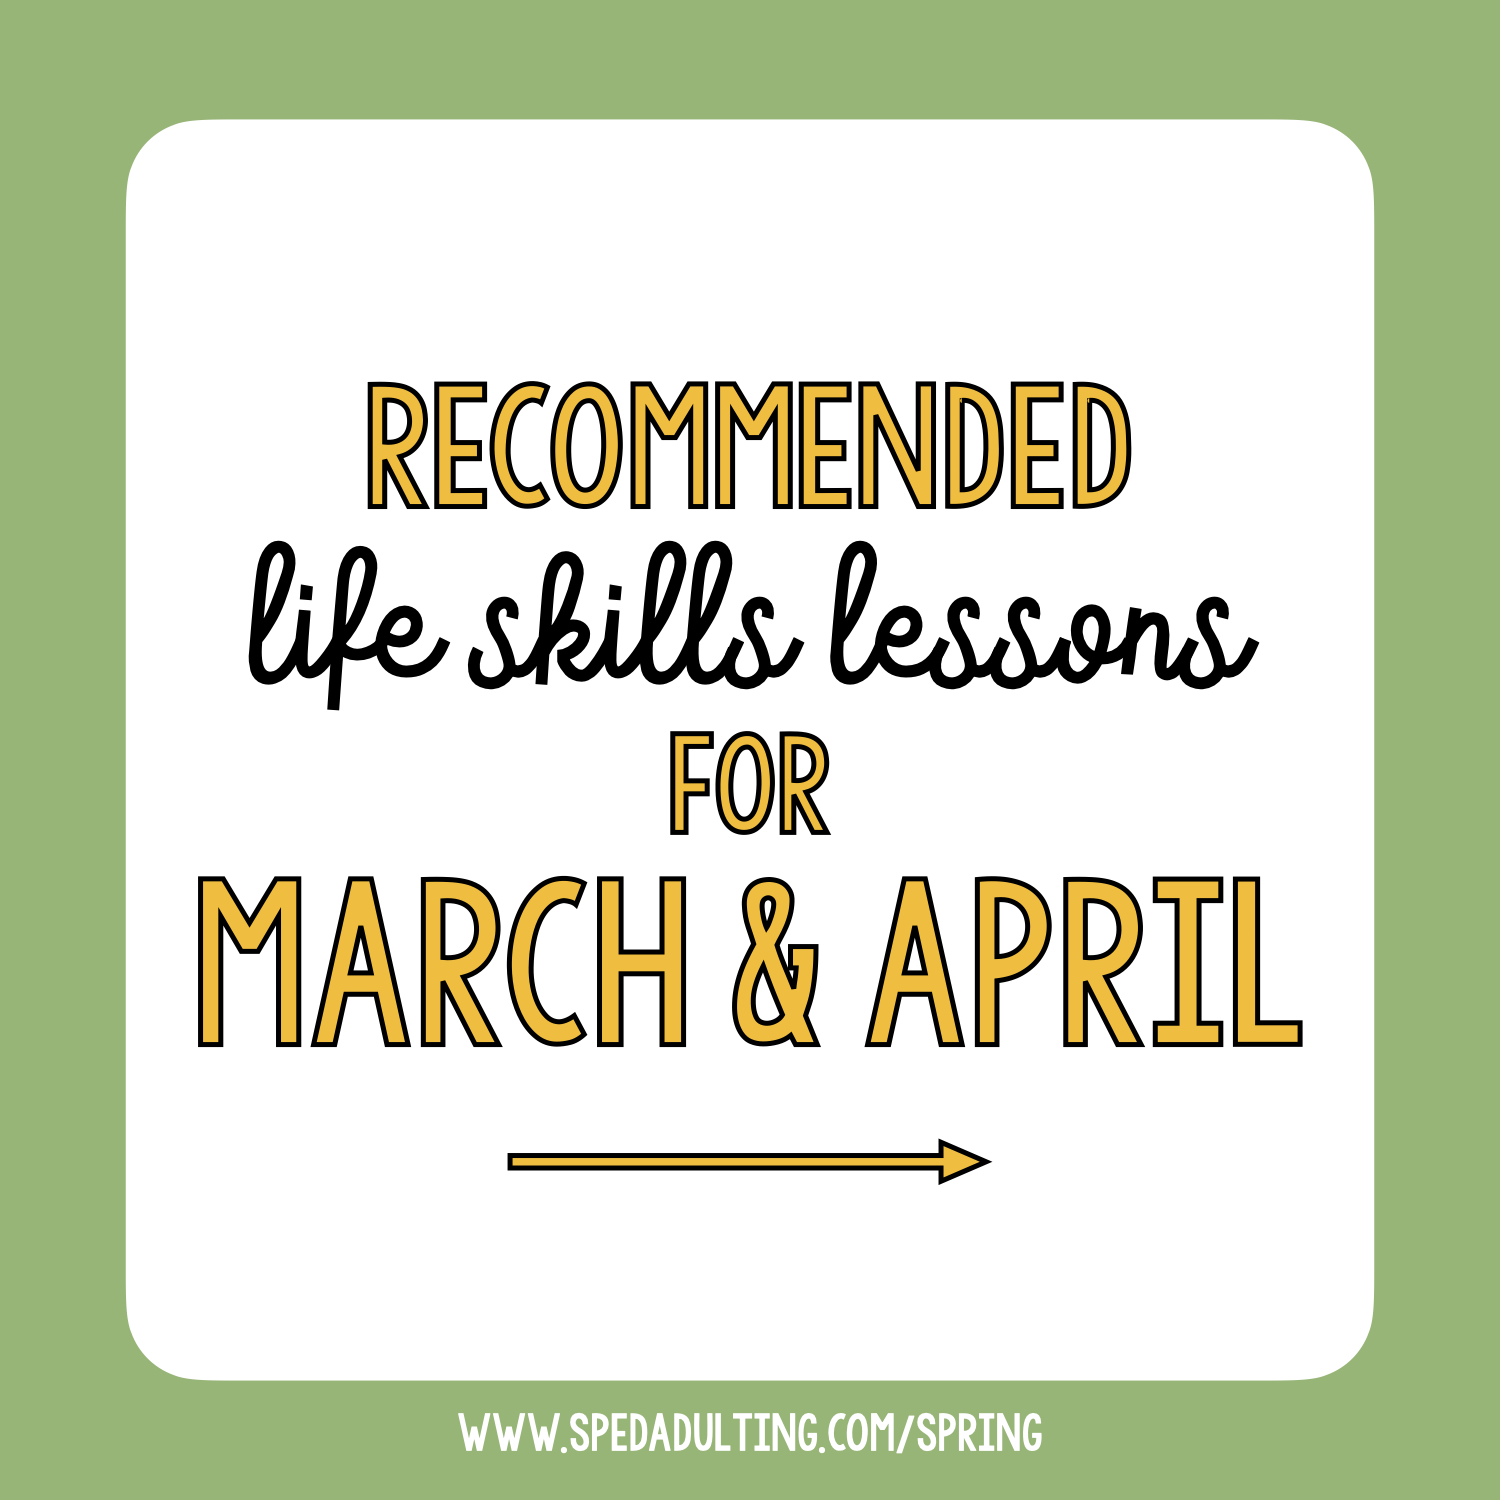 BLOG: Recommended life skills lessons for March & April